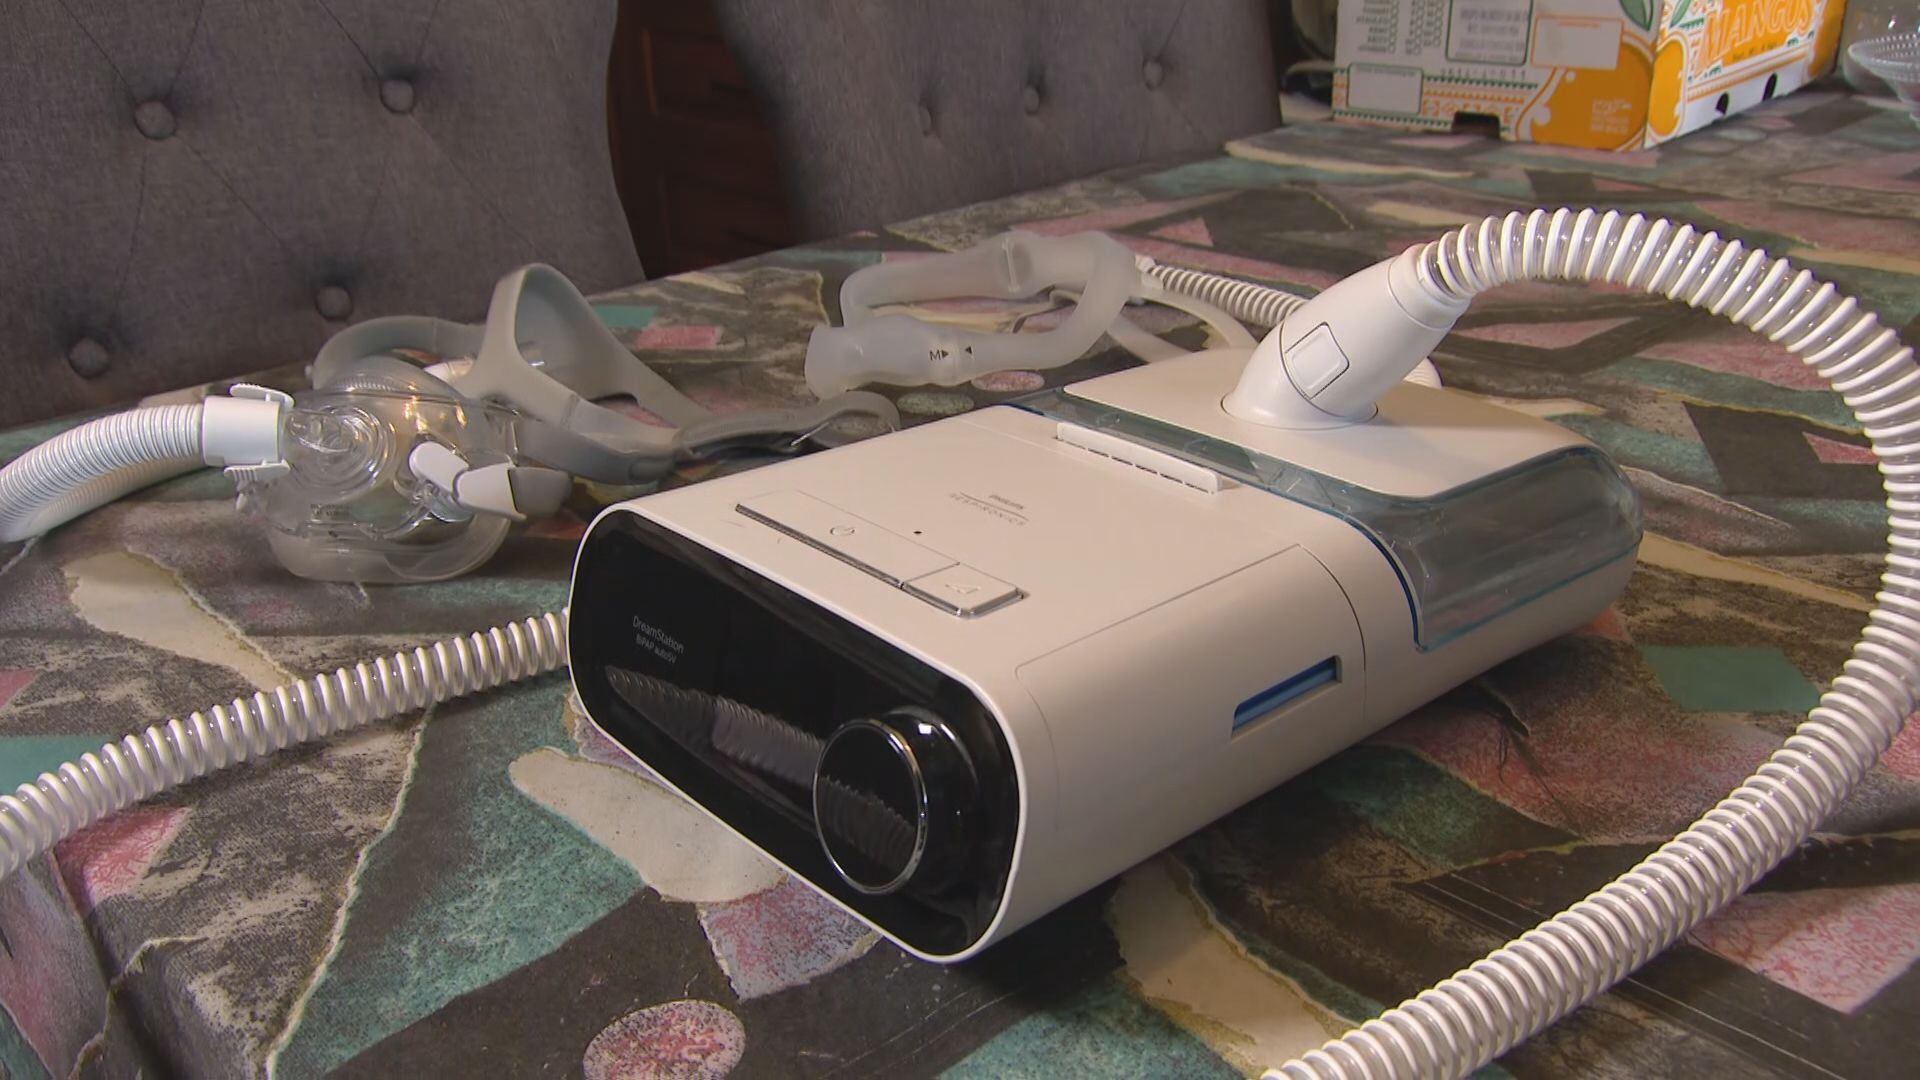 Aurora man fights to get lifesaving device replaced after it was recalled